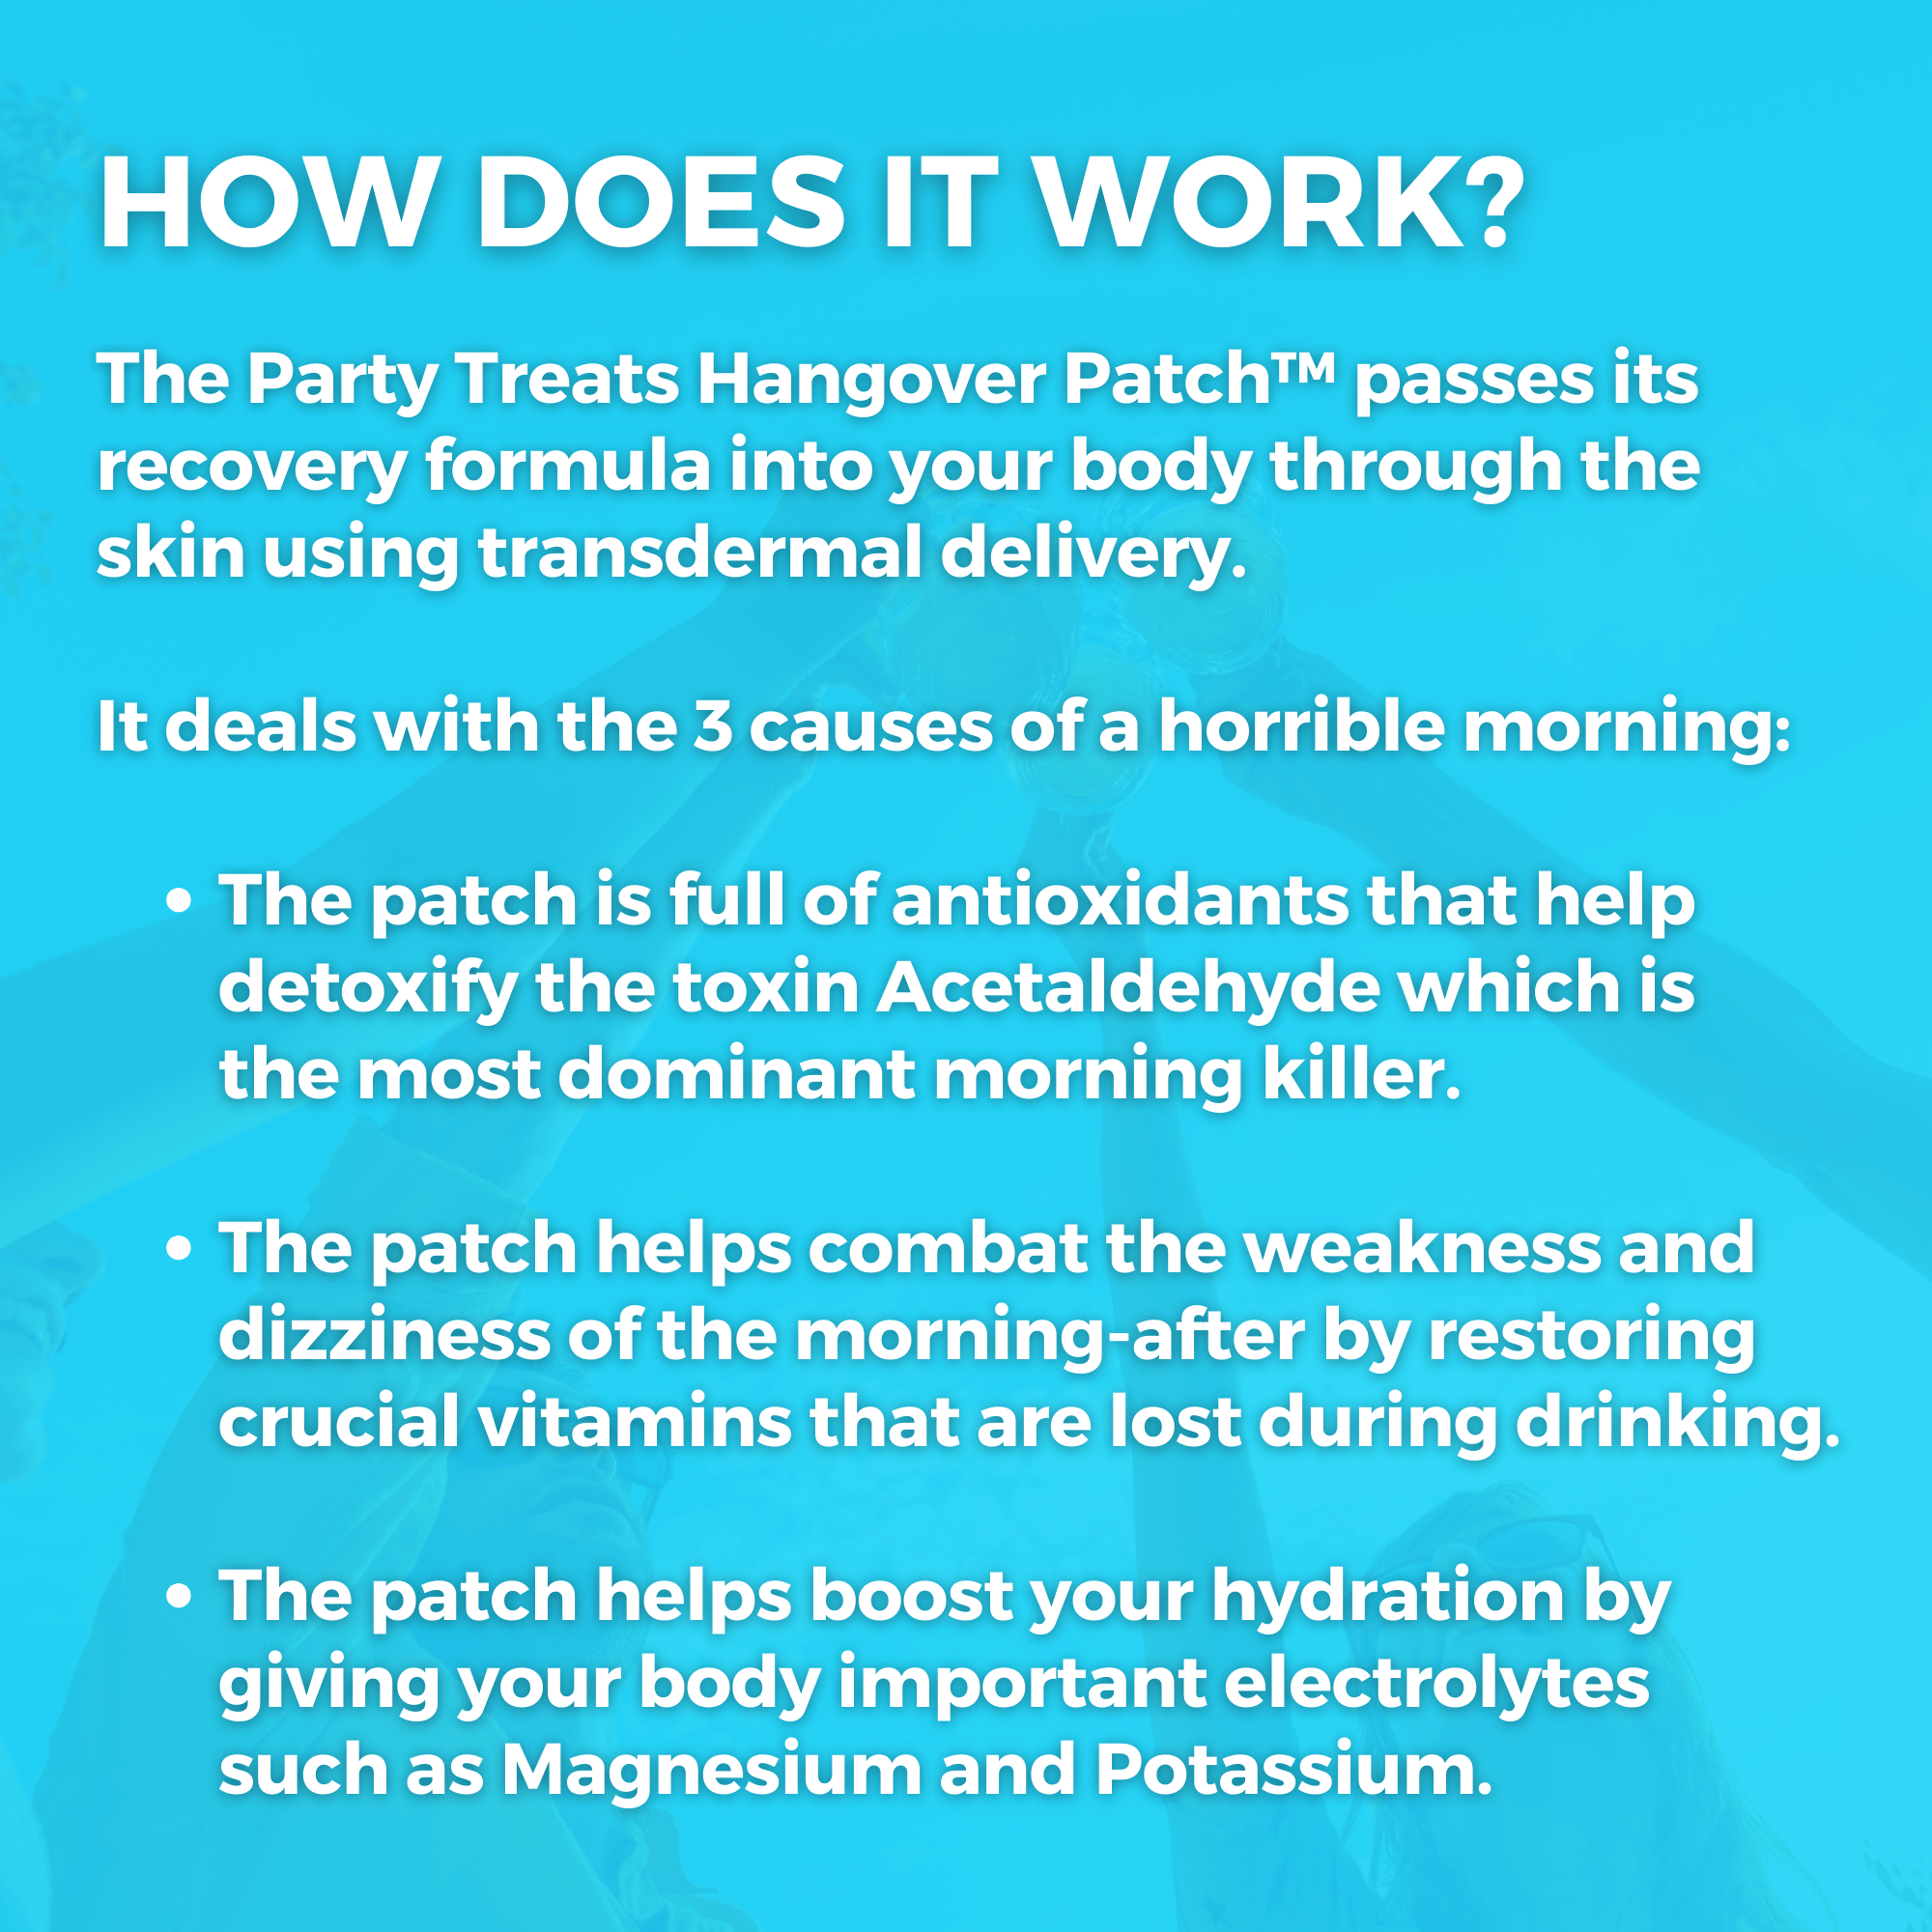 The Hangover Patch, Party Treats